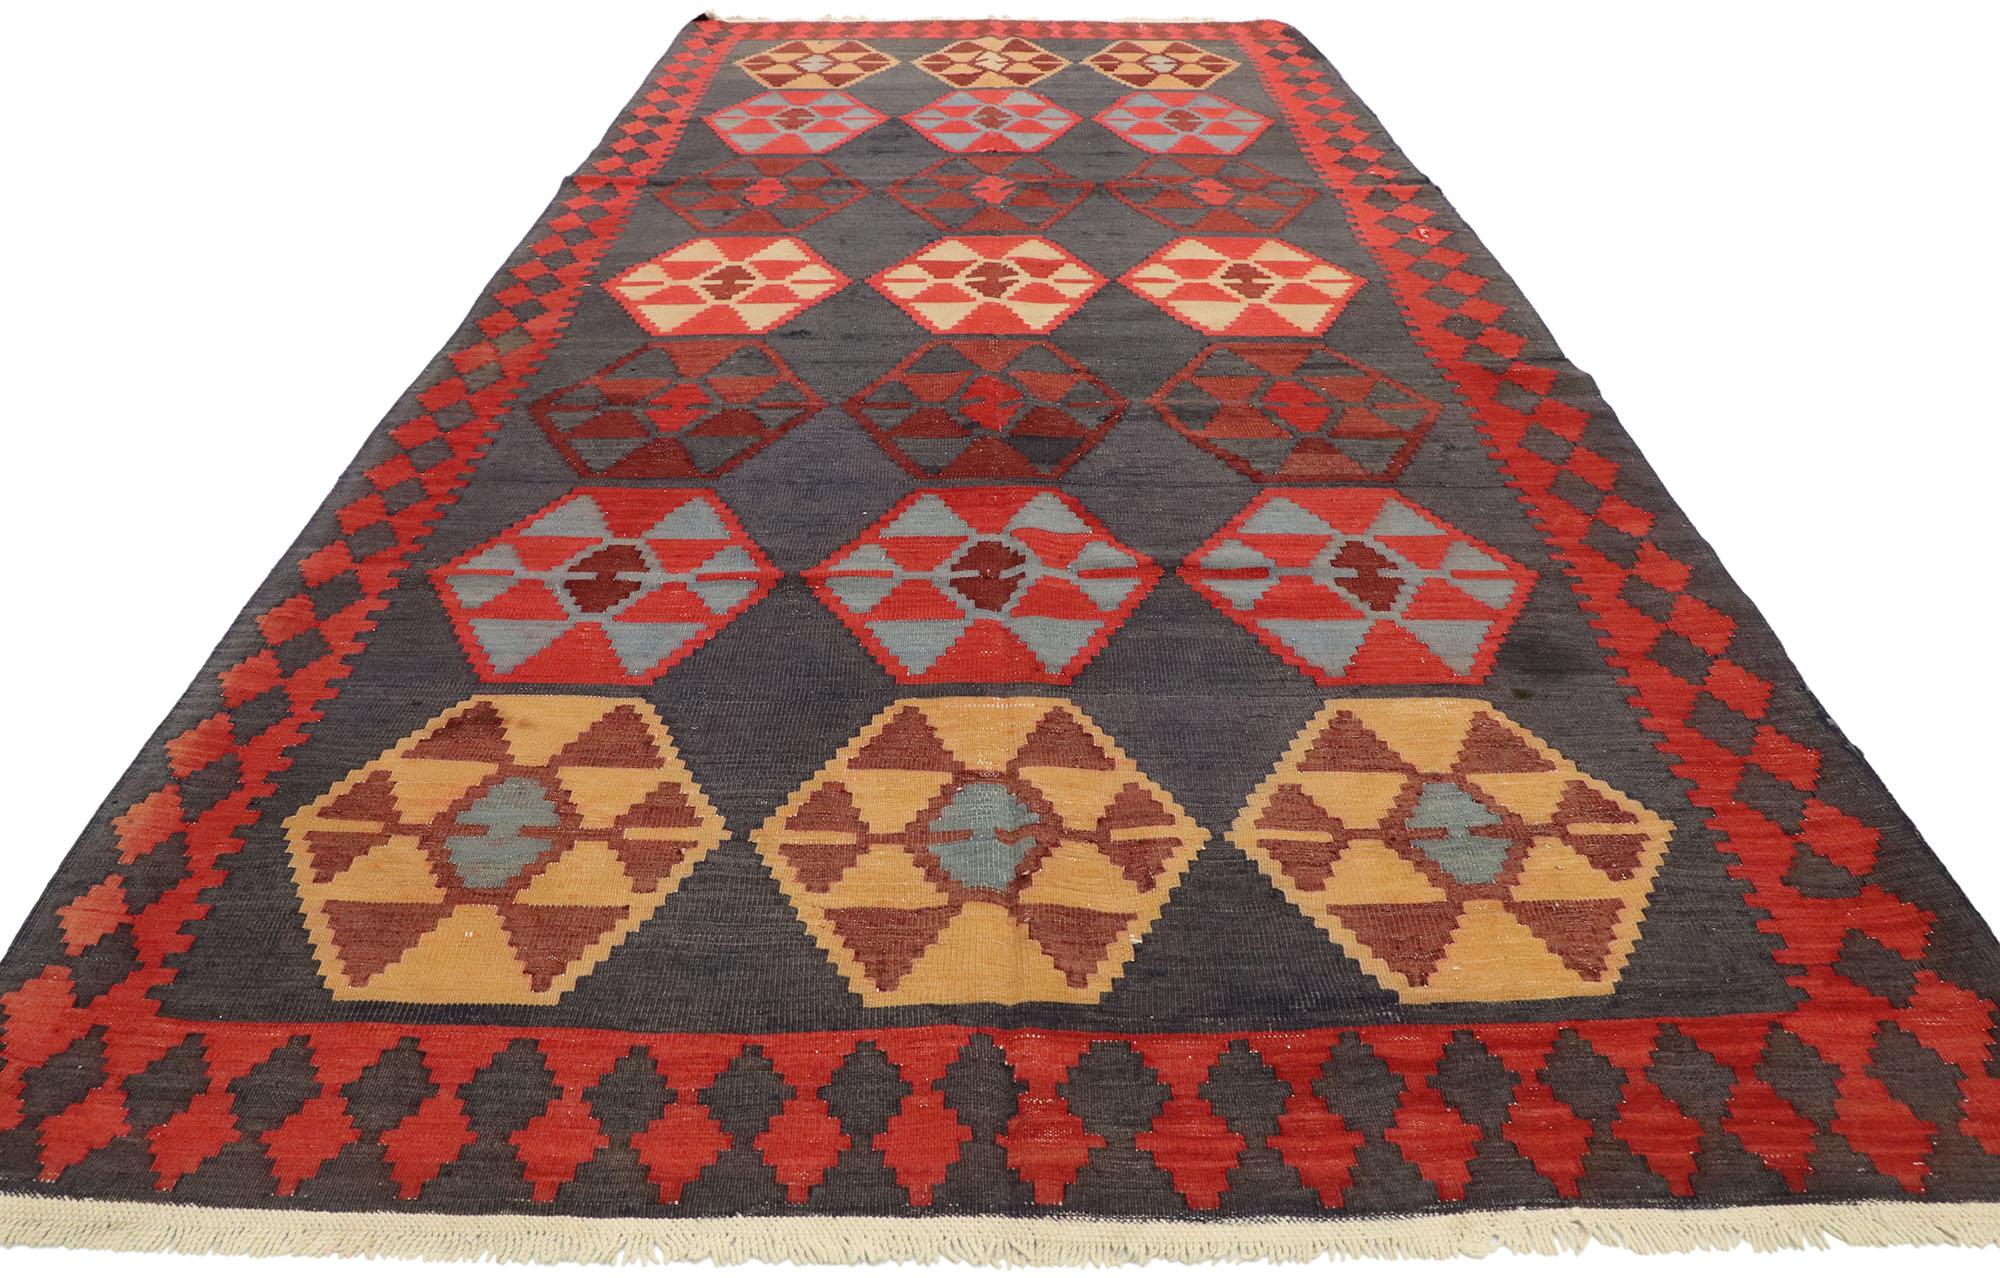 Hand-Woven Vintage Persian Shiraz Kilim Rug with Modern Northwestern Tribal Style For Sale